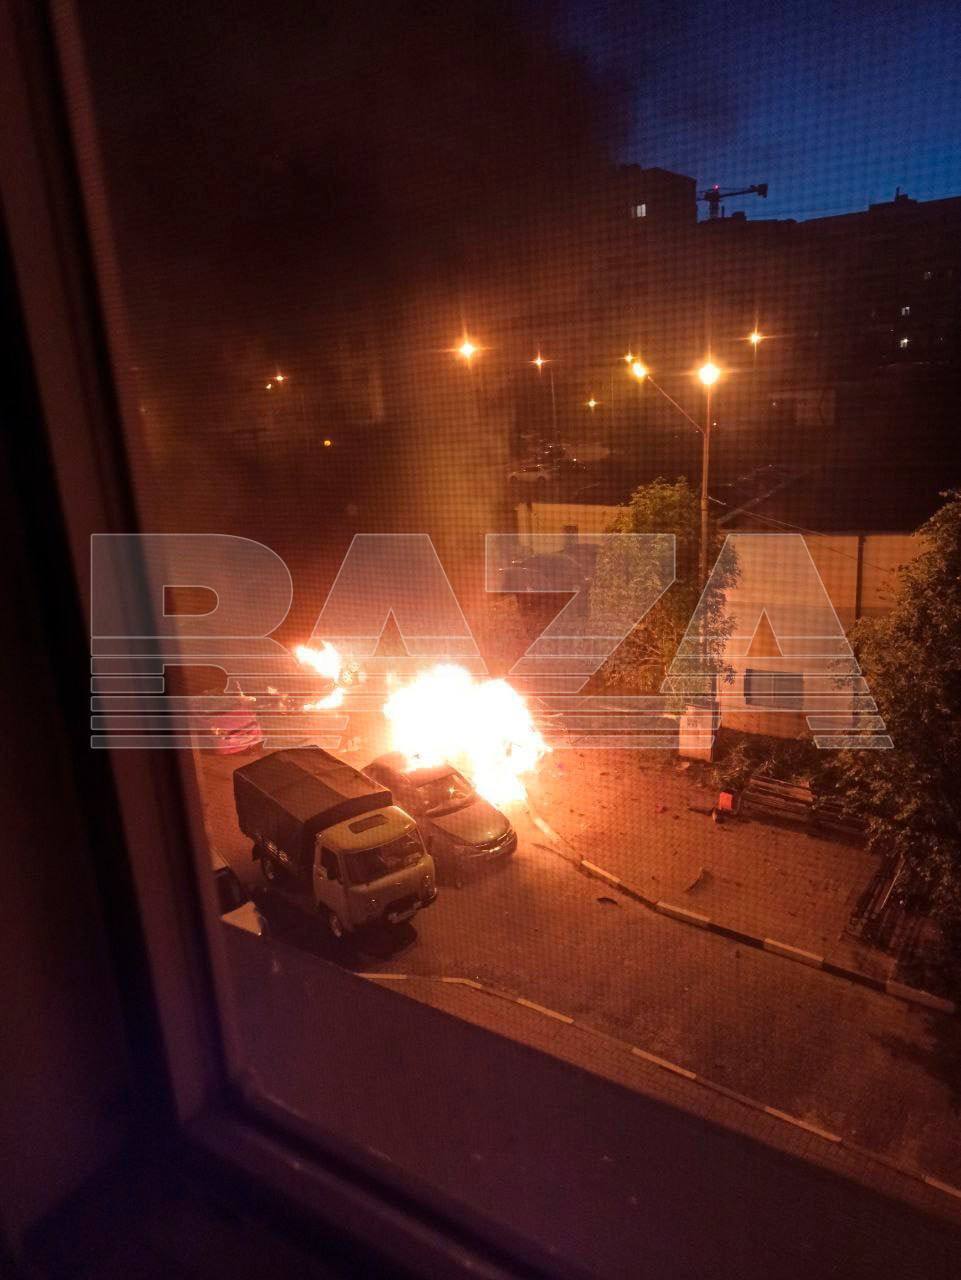 Explosions have been heard in the Russian city of Belgorod: the authorities reported damage to buildings and injuries. Photos and videos